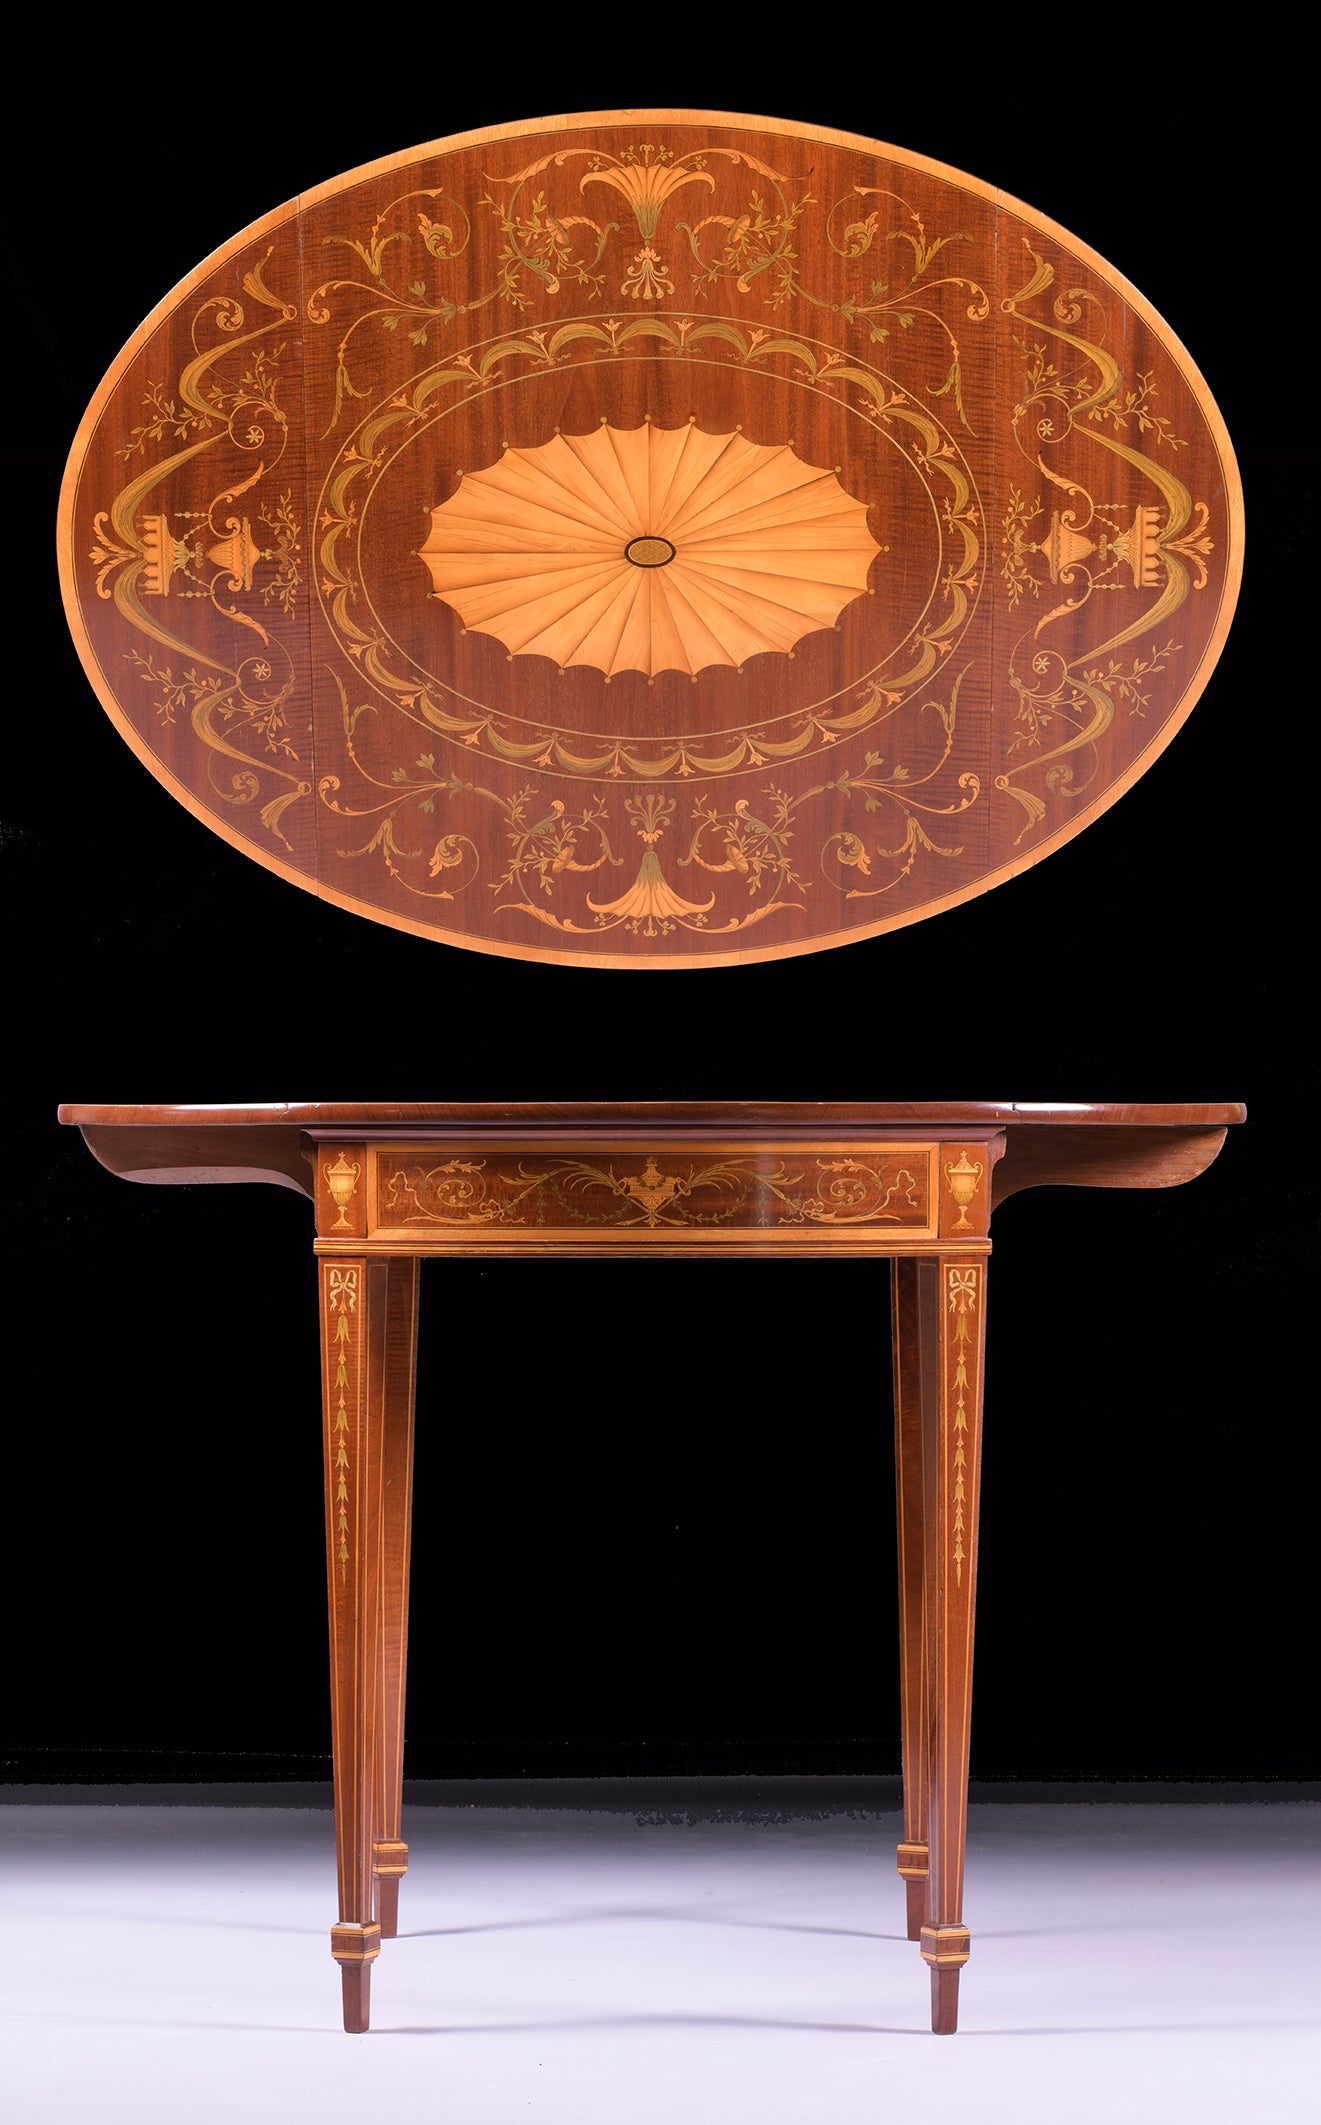 PEMBROKE TABLE BY EDWARDS & ROBERTS - REF No. 9064